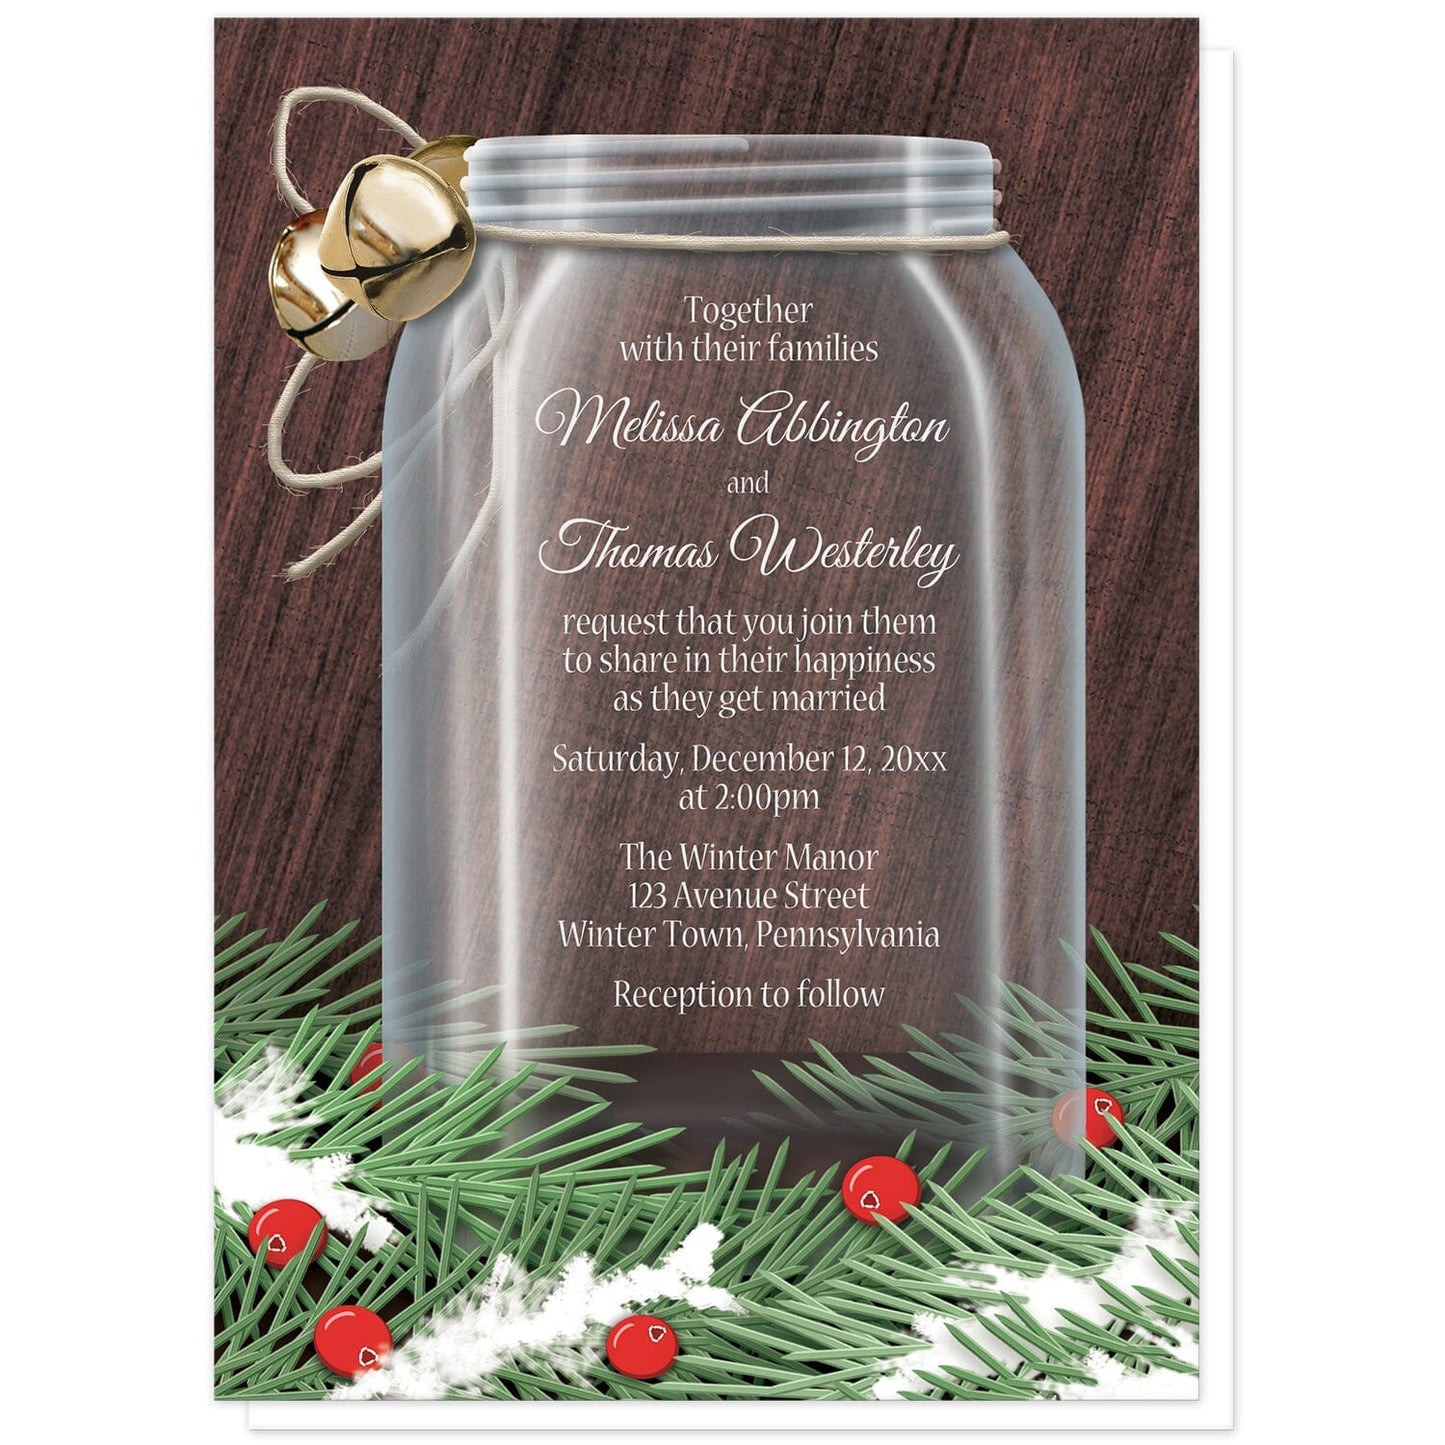 Winter Mason Jar Pine Boughs Wedding Invitations at Artistically Invited. Rustic holiday-themed winter mason jar pine boughs wedding invitations designed with a glass mason jar illustration with twine and jingle bells tied around the top of the jar and pine boughs and cranberries along the bottom over a dark wood design. Your personalized marriage celebration details are custom printed in white over the mason jar area of the design.